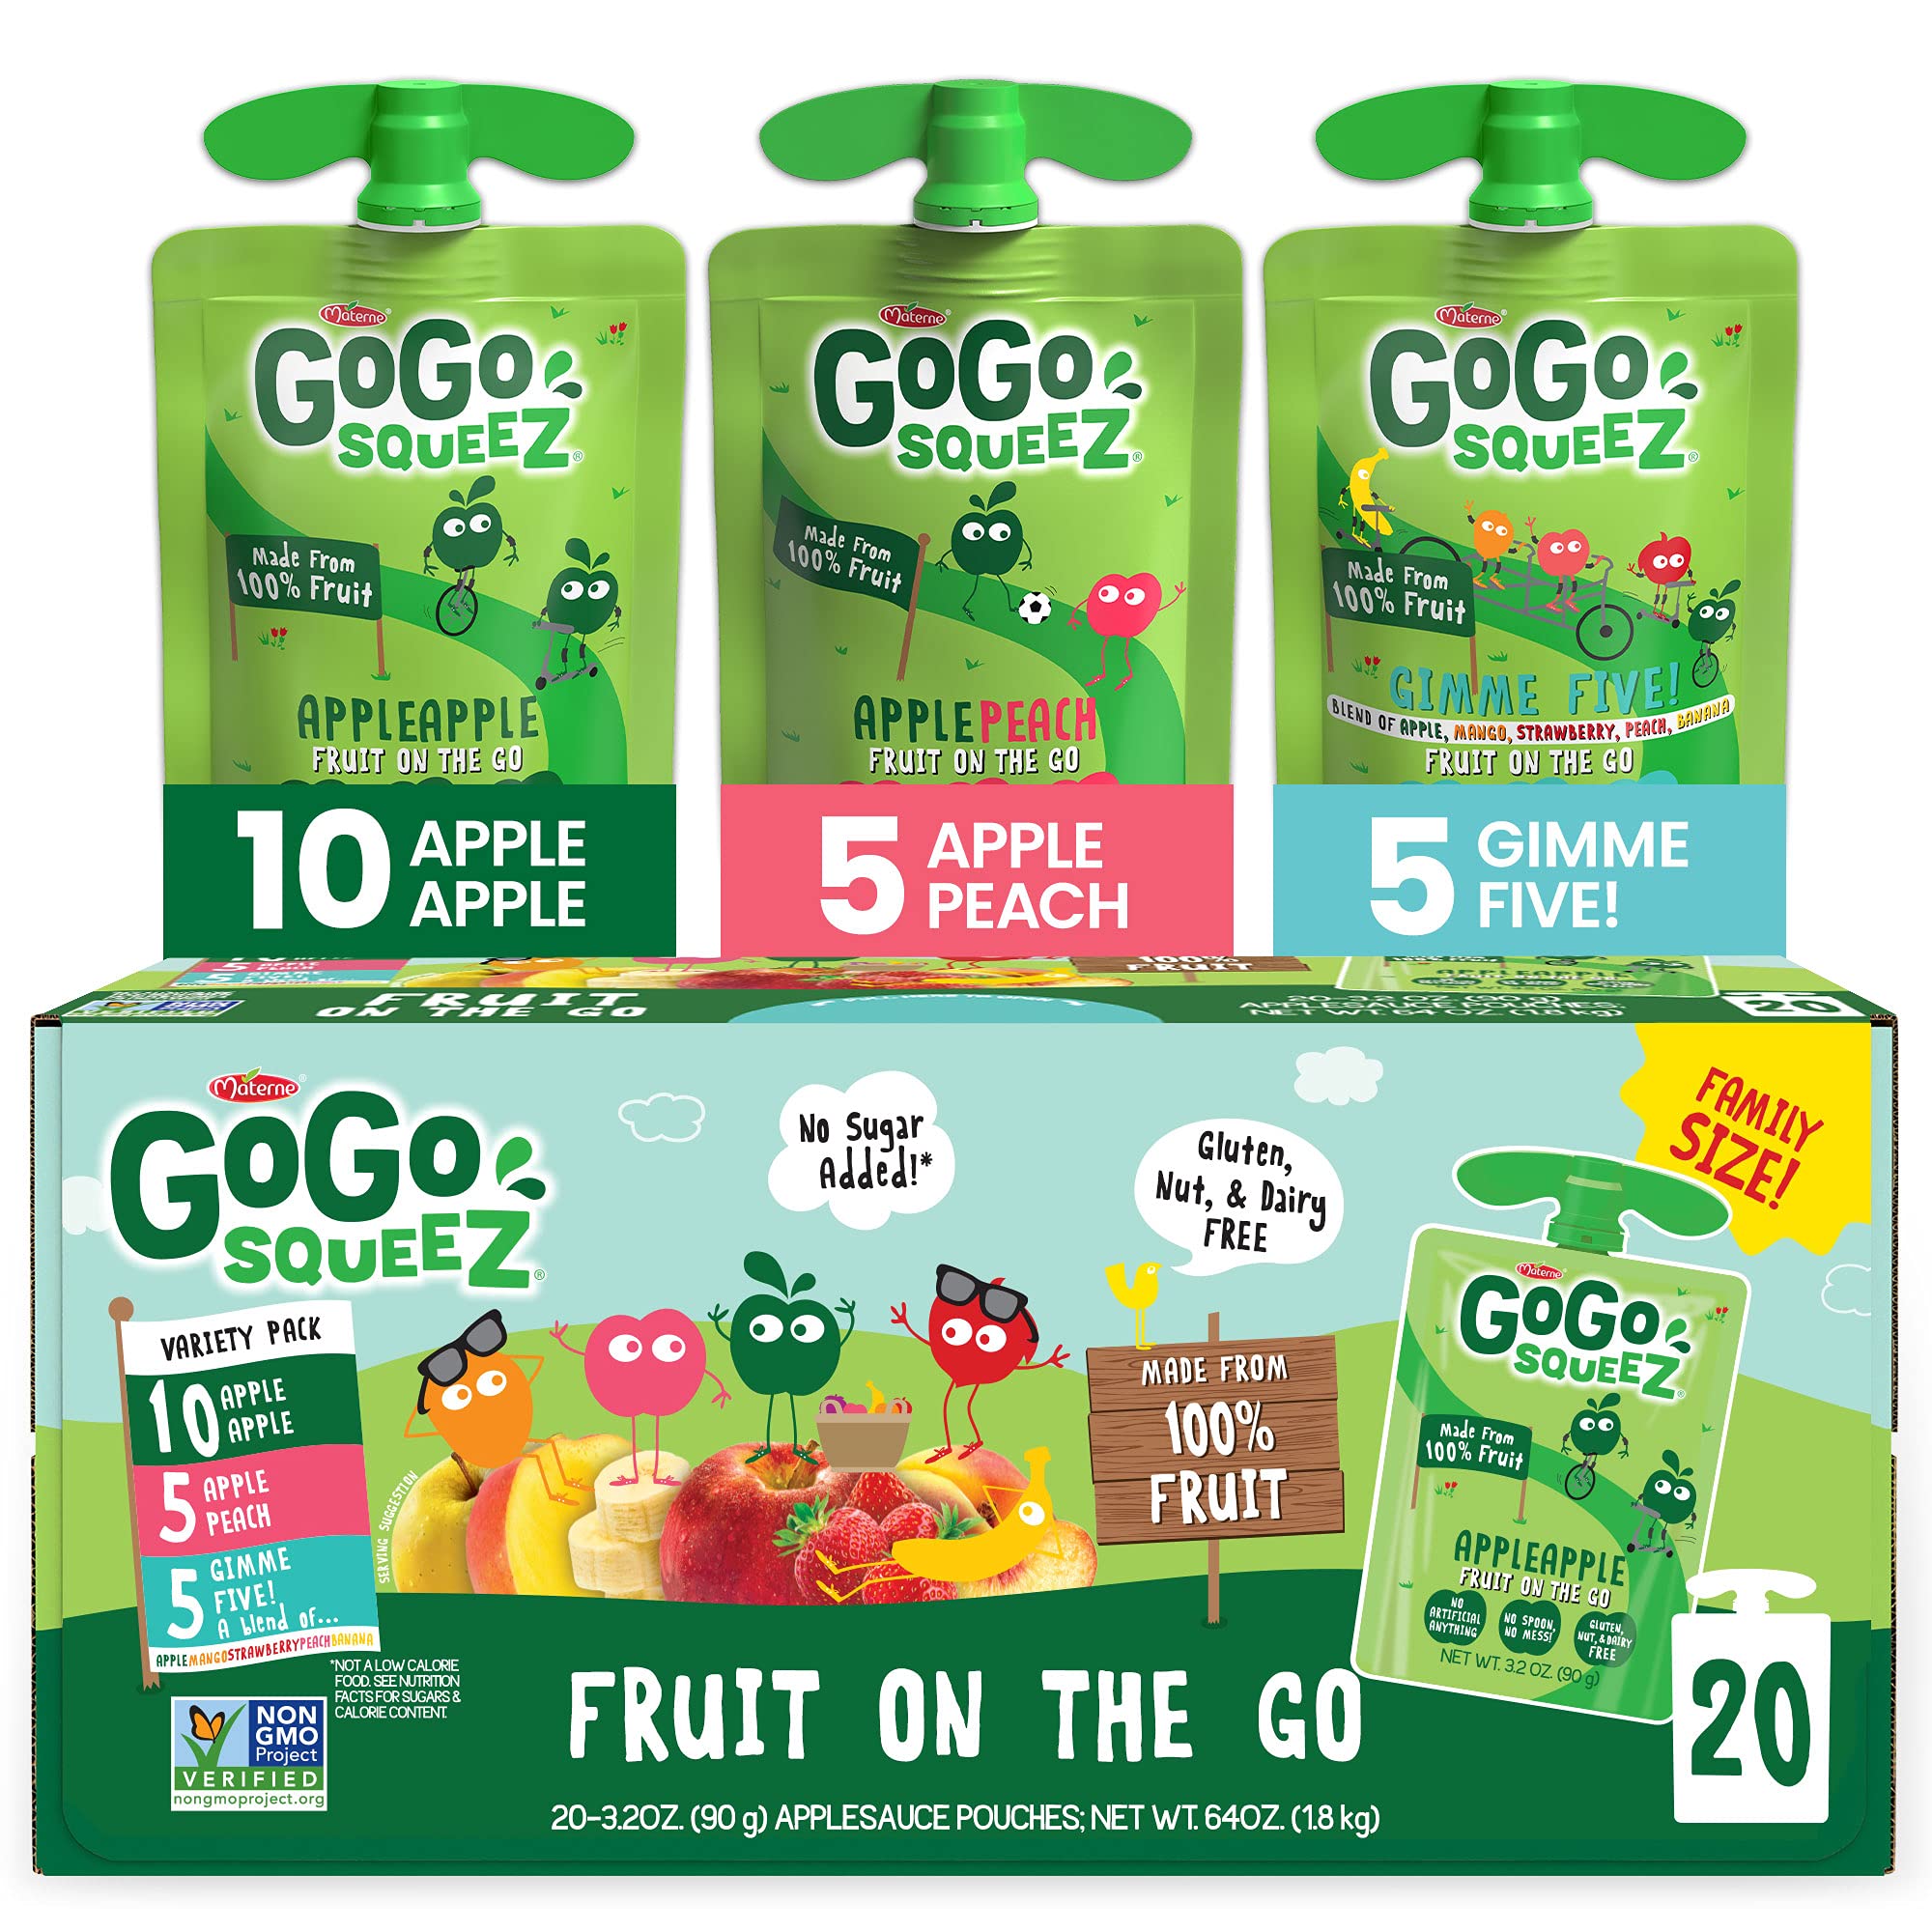 GoGo squeeZ Variety Pack